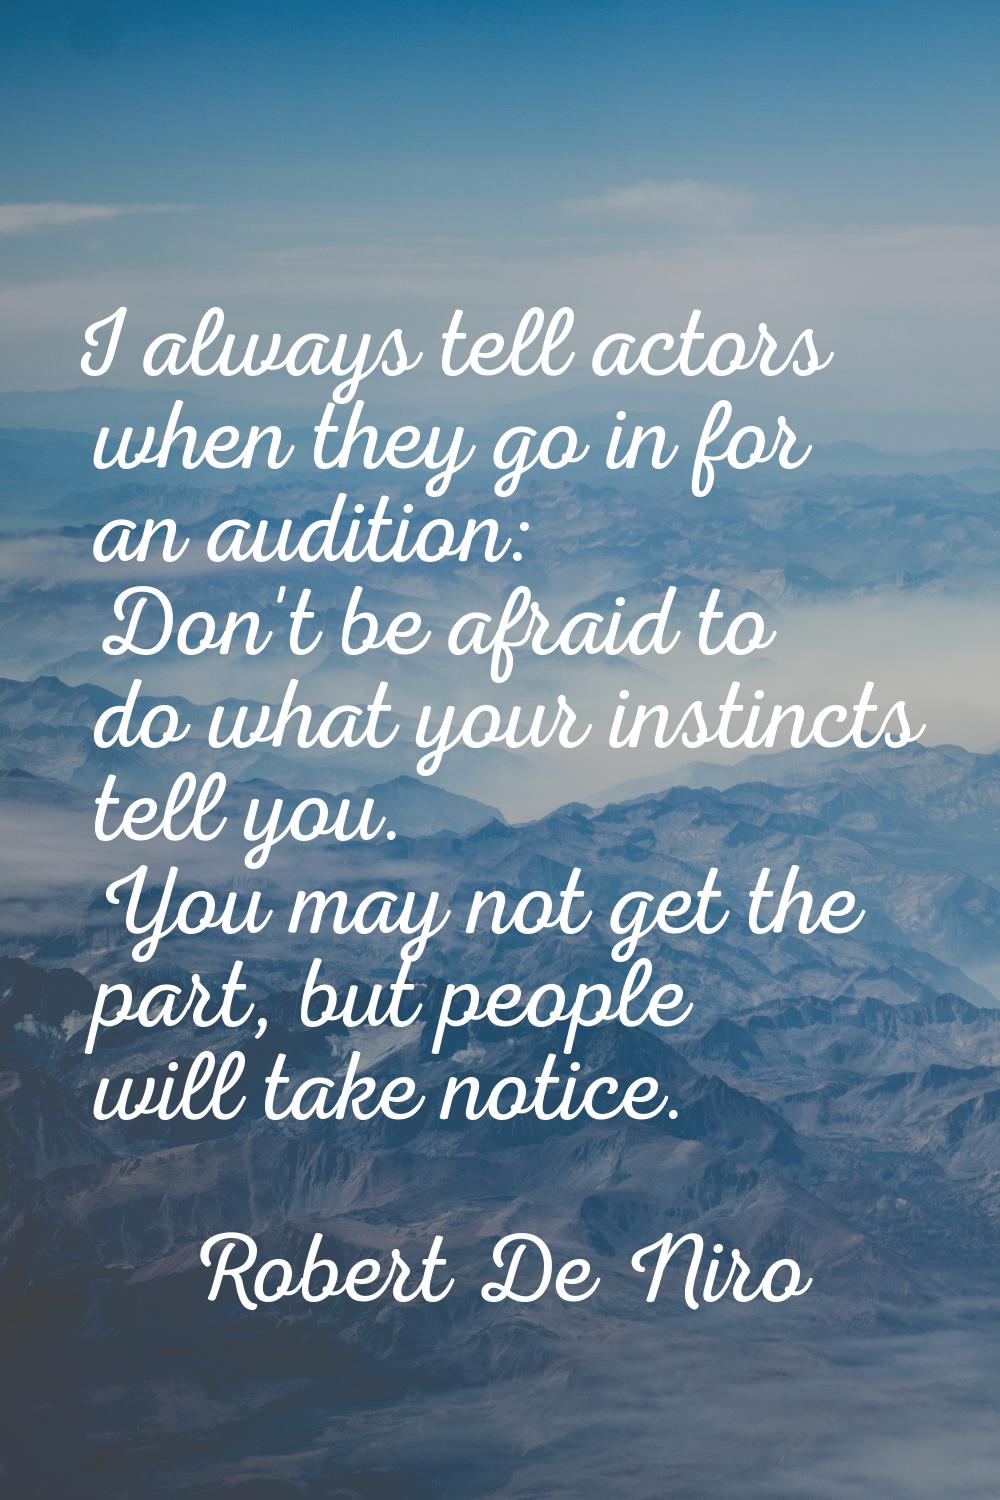 I always tell actors when they go in for an audition: Don't be afraid to do what your instincts tel